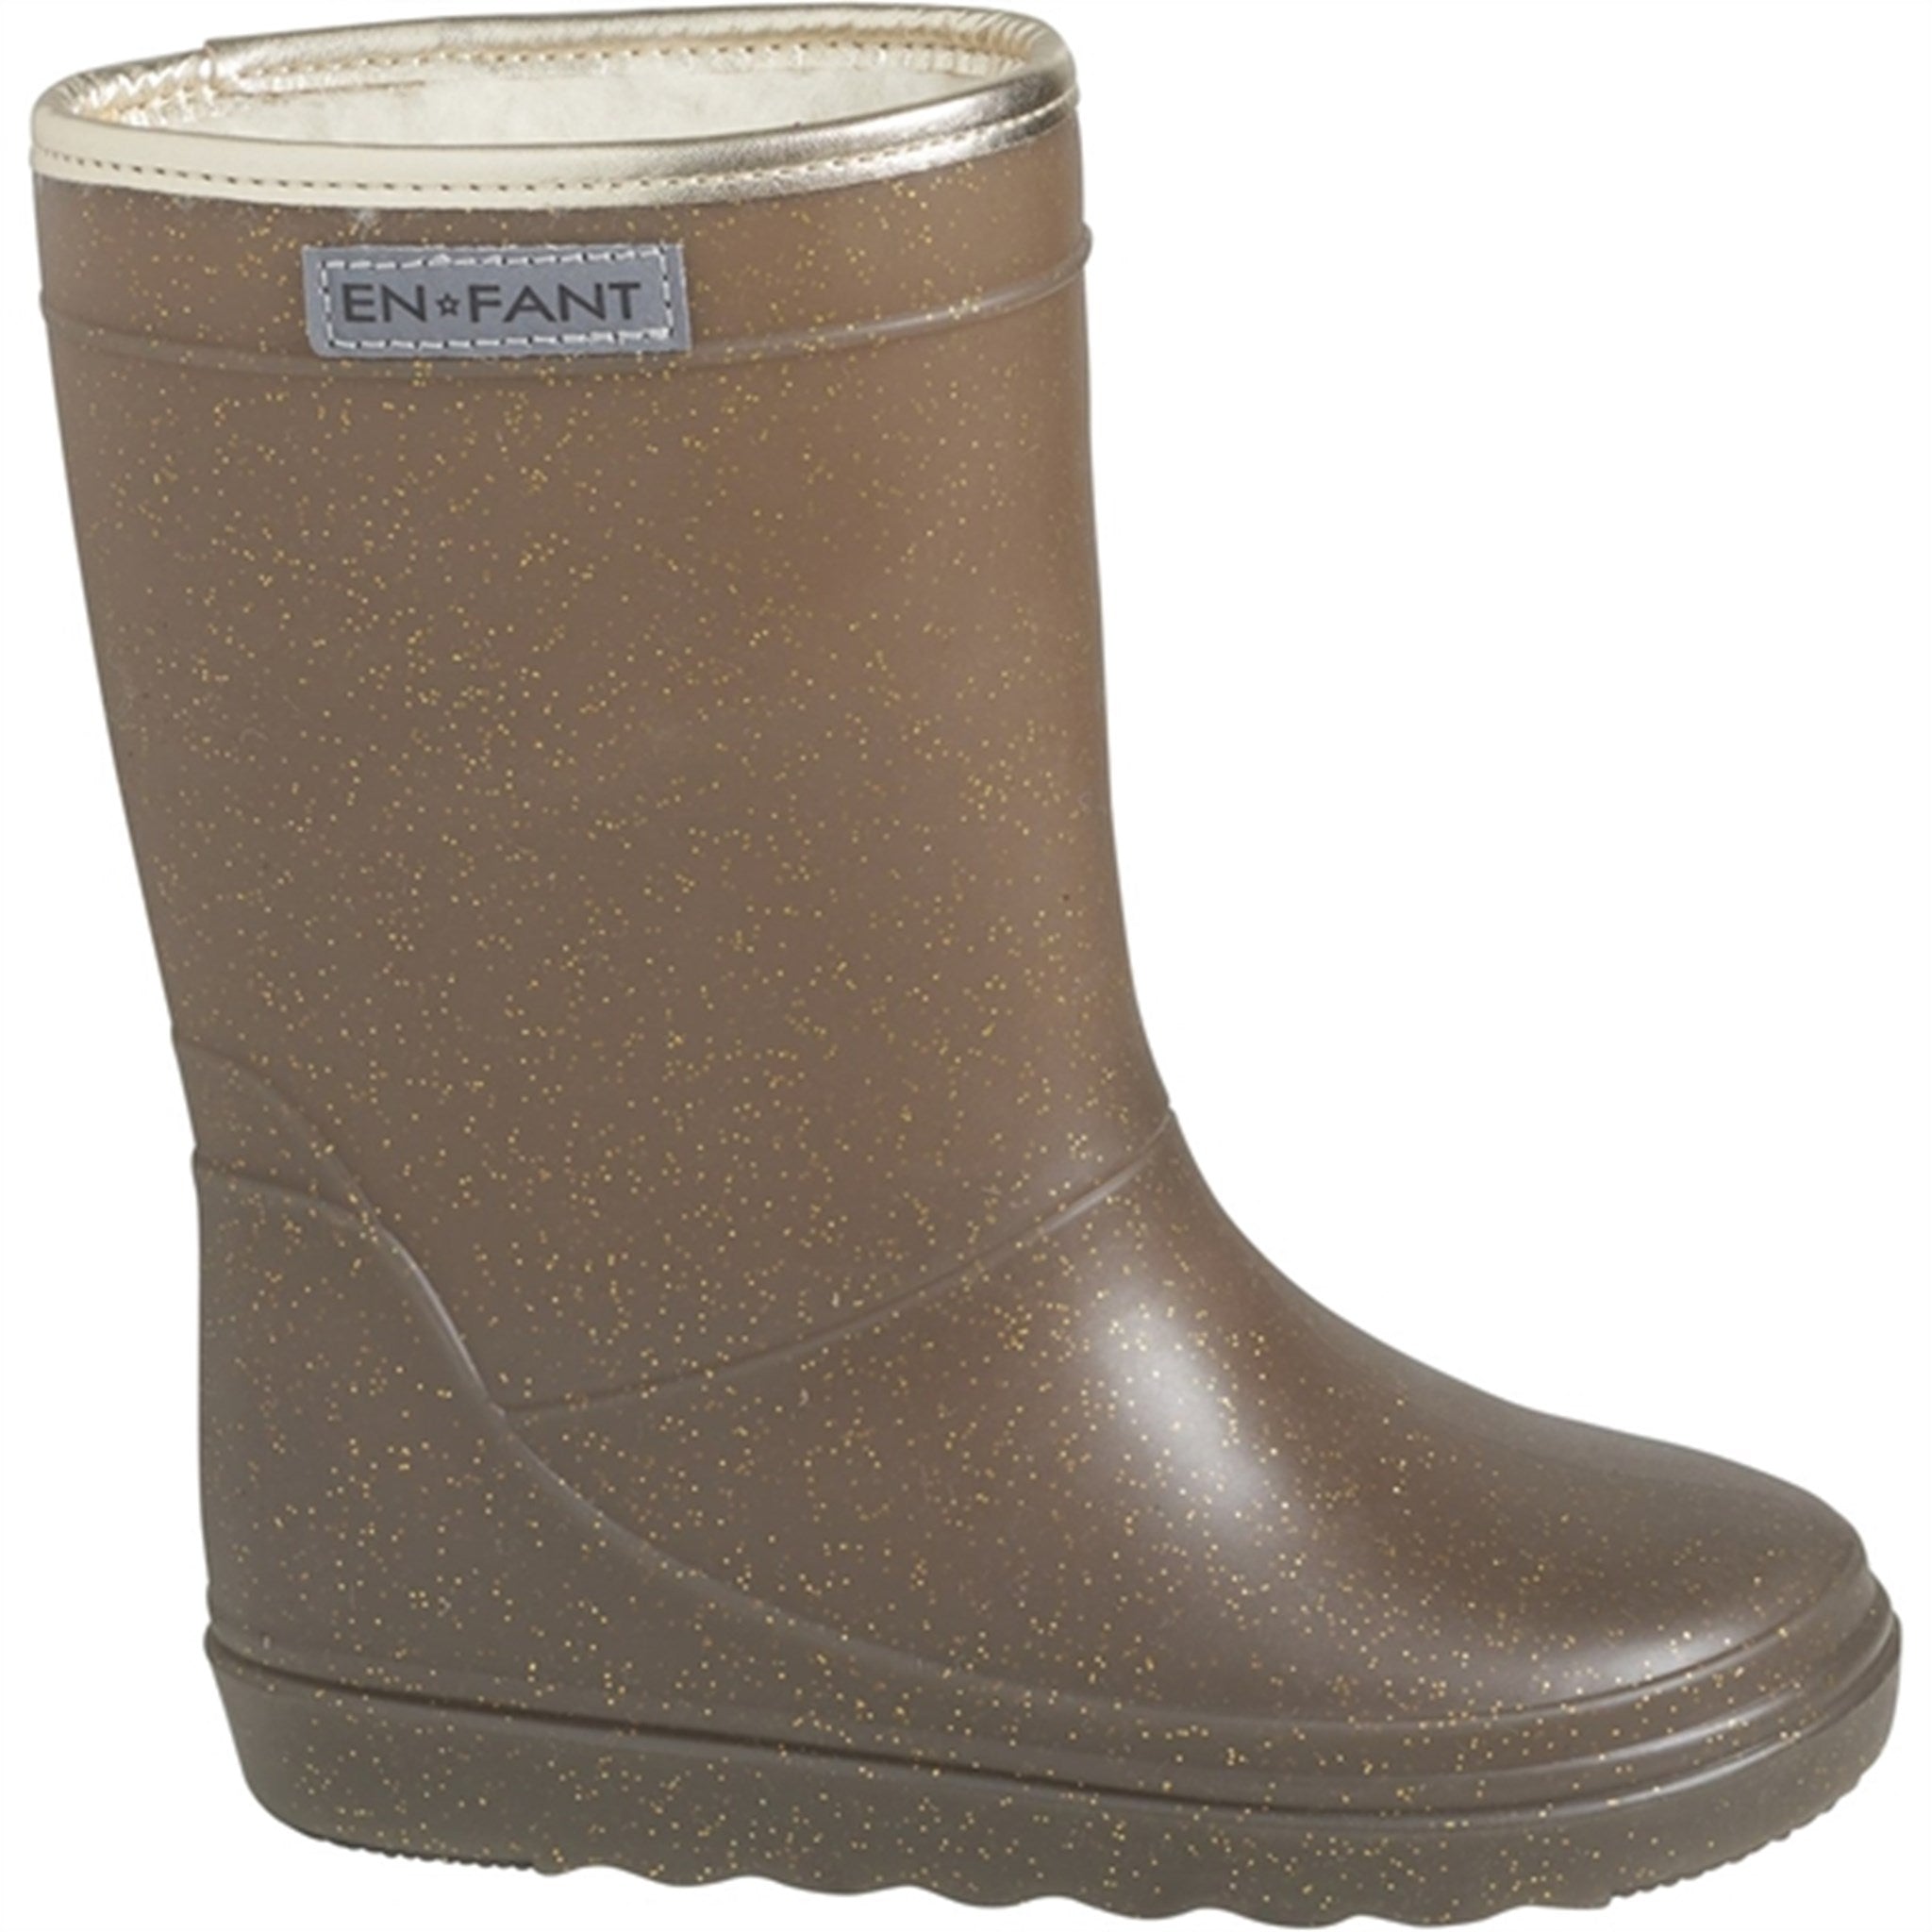 En Fant Thermo Boots Glitter Chocolate Chip 3